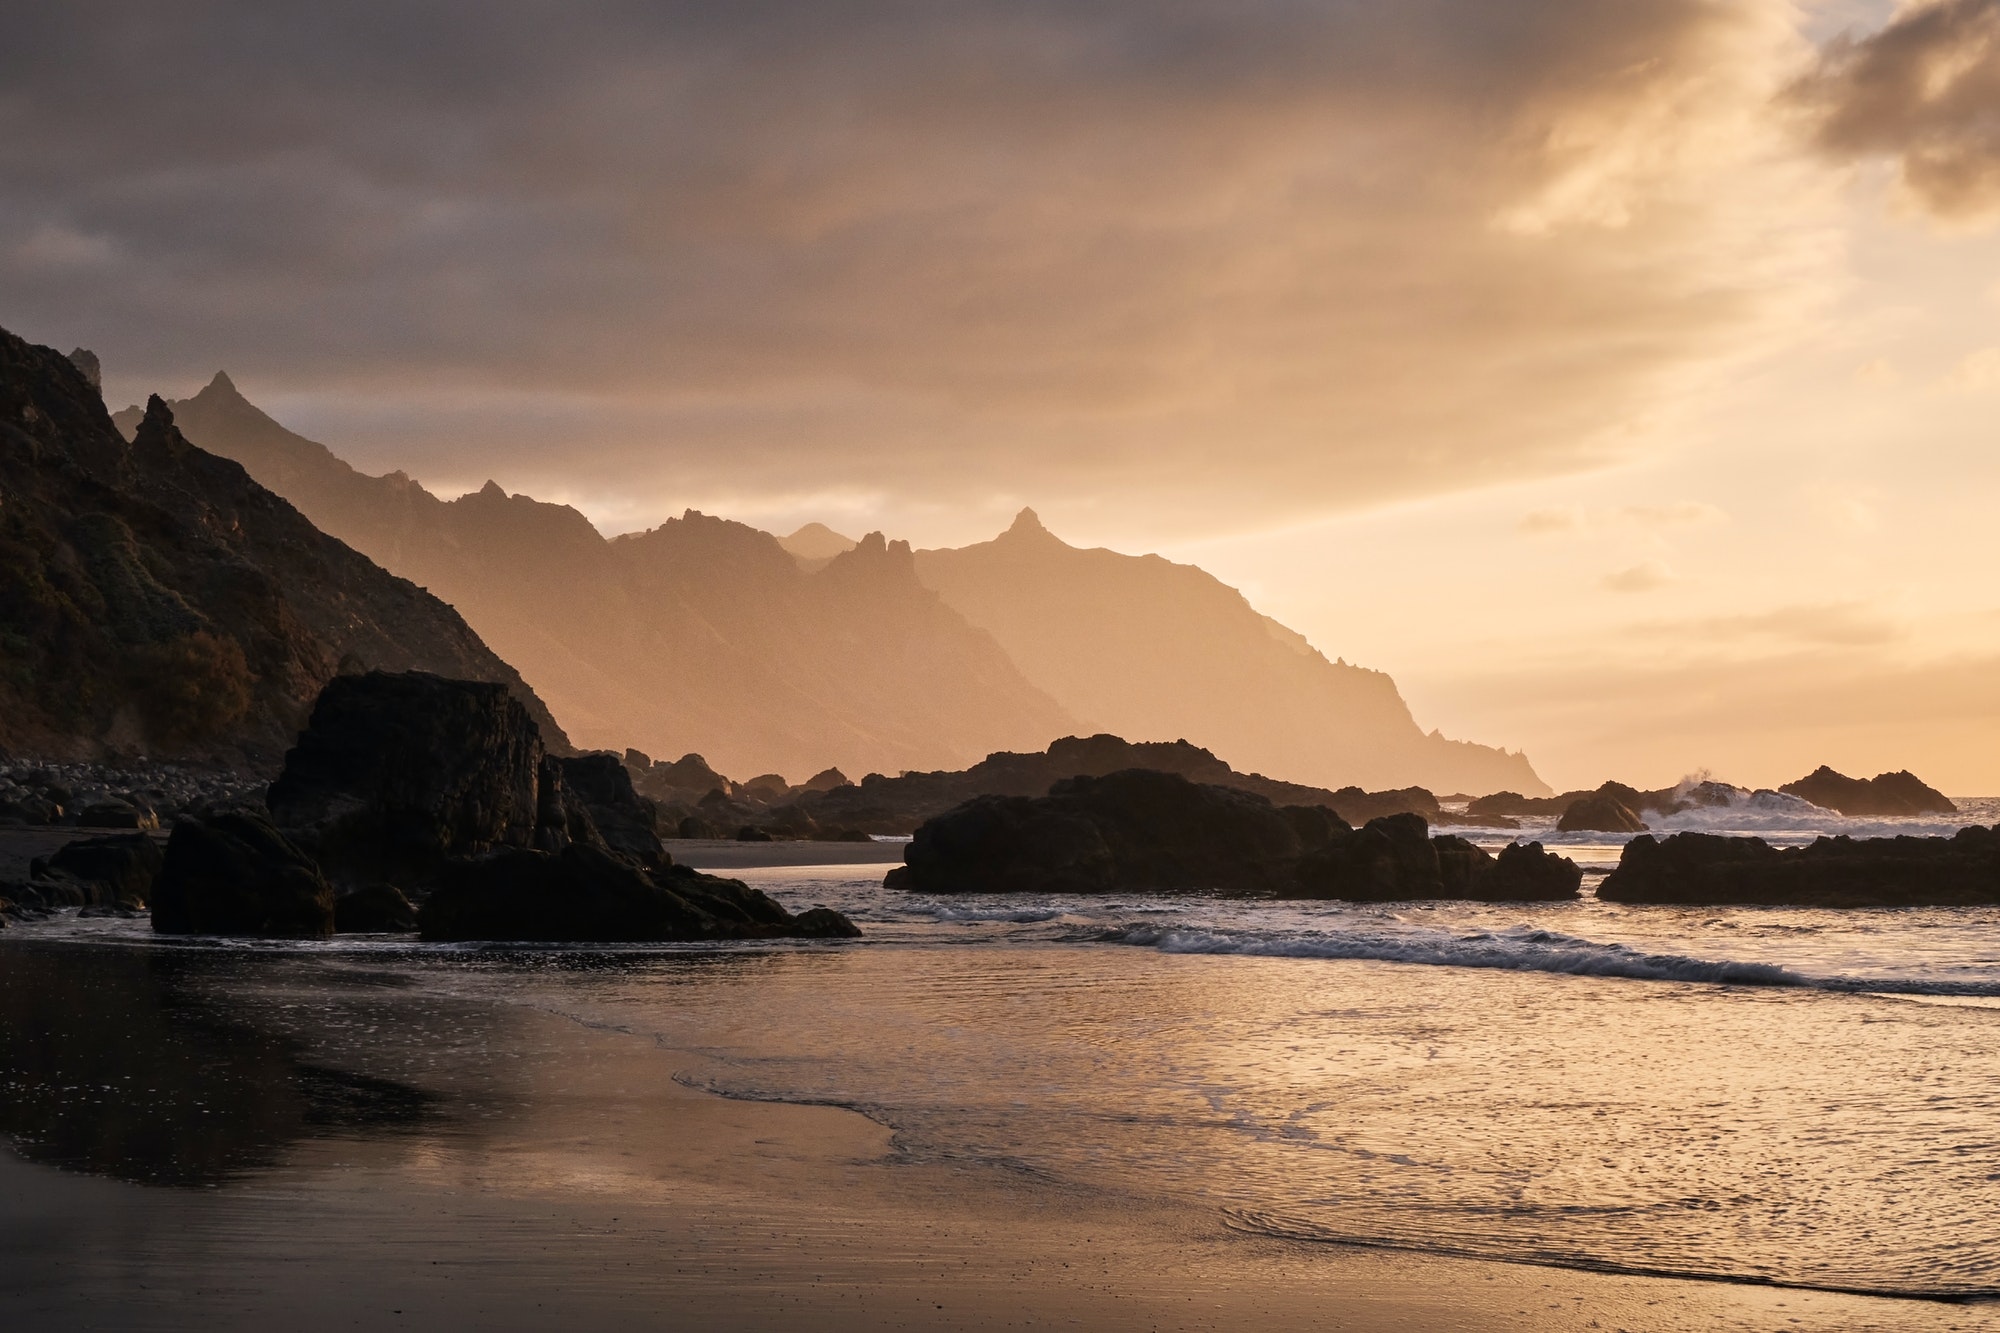 Silhouettes of cliffs on the coast in the golden light of the sunset. Tenerife, Canary Islands.